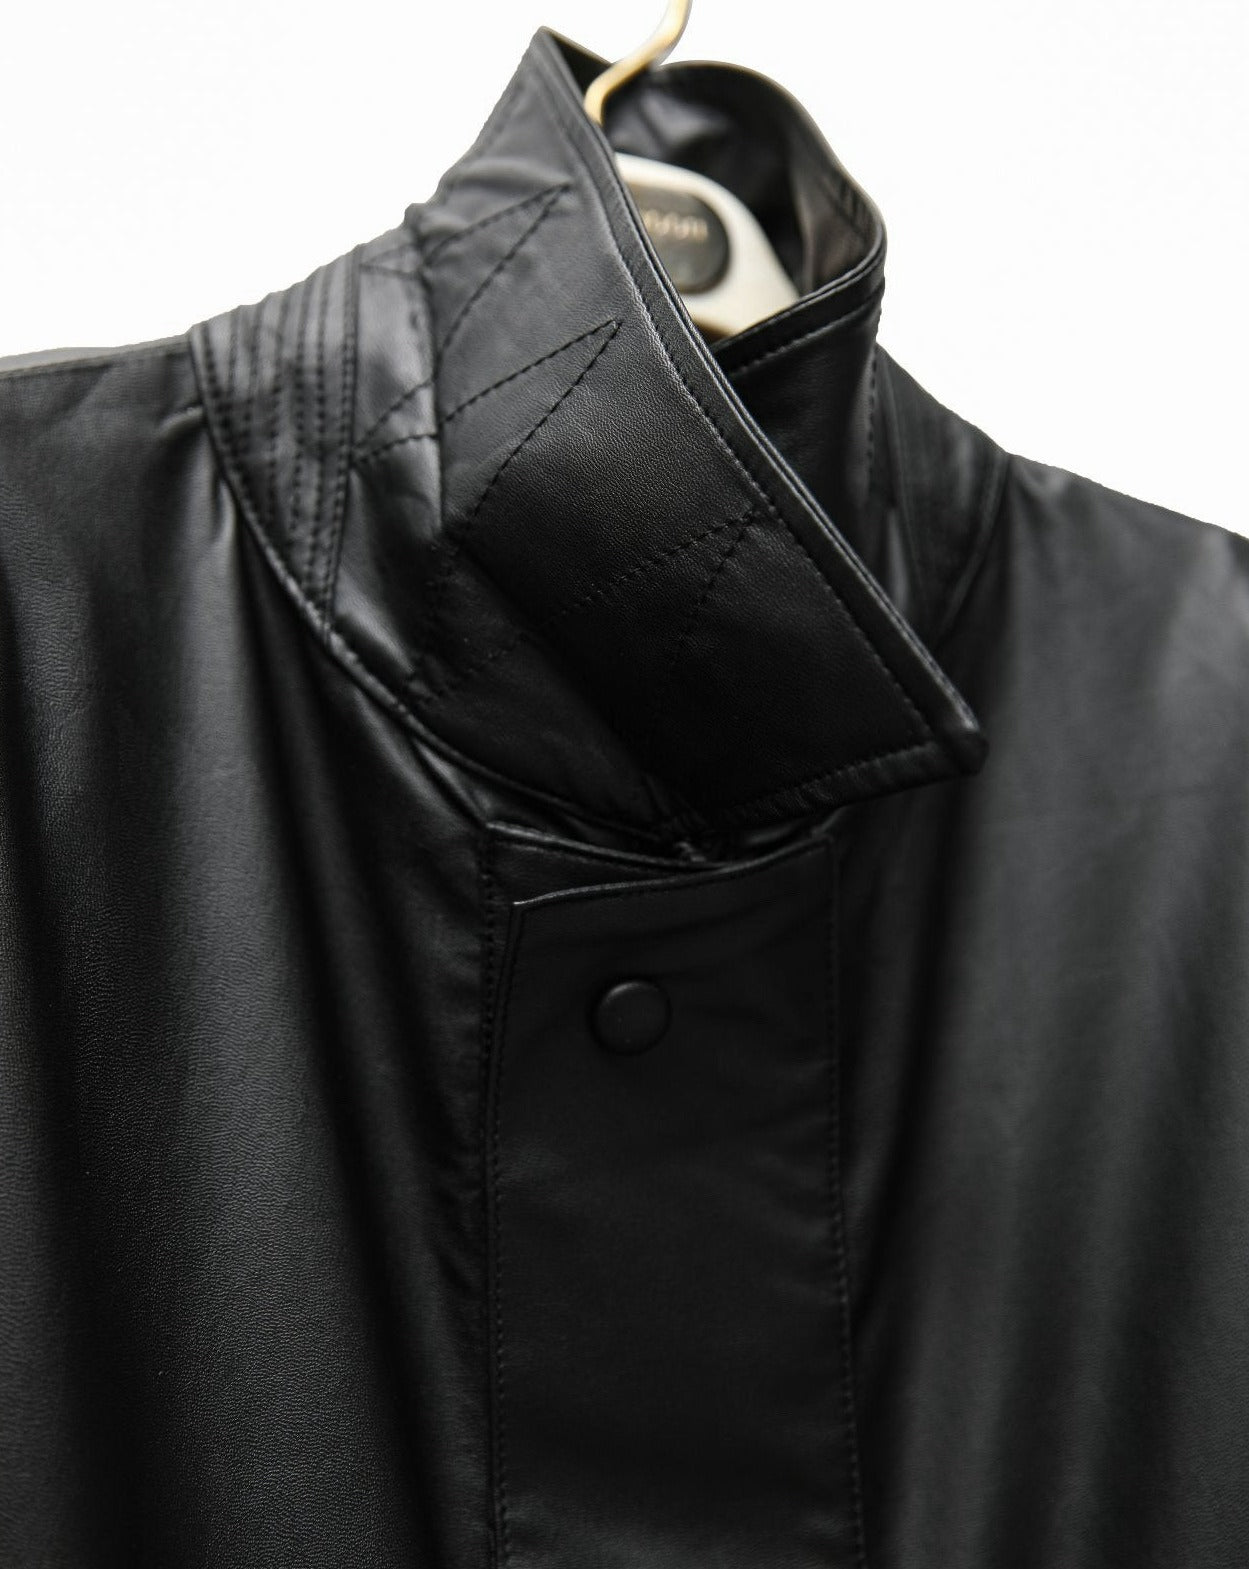 【PAPERMOON ペーパームーン】SS / Oversized Vegan Leather Snap Button Detail Jumpsuit